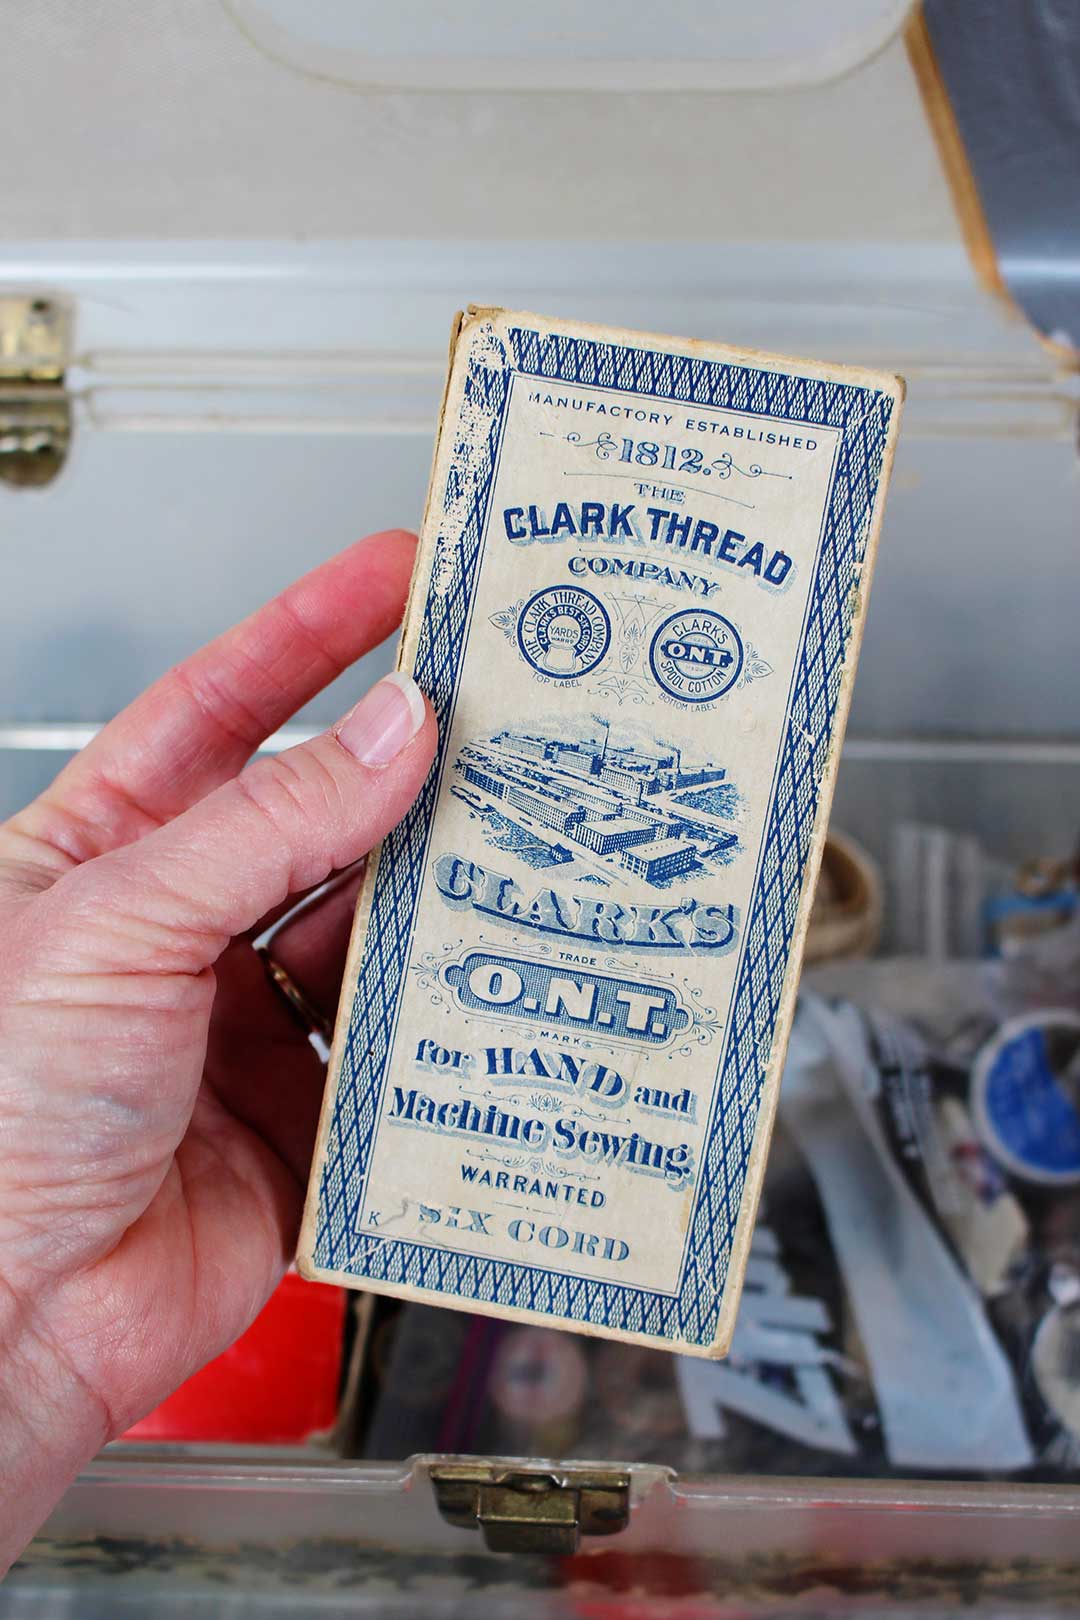 1812 Clark Thread Company box for hand sewing.